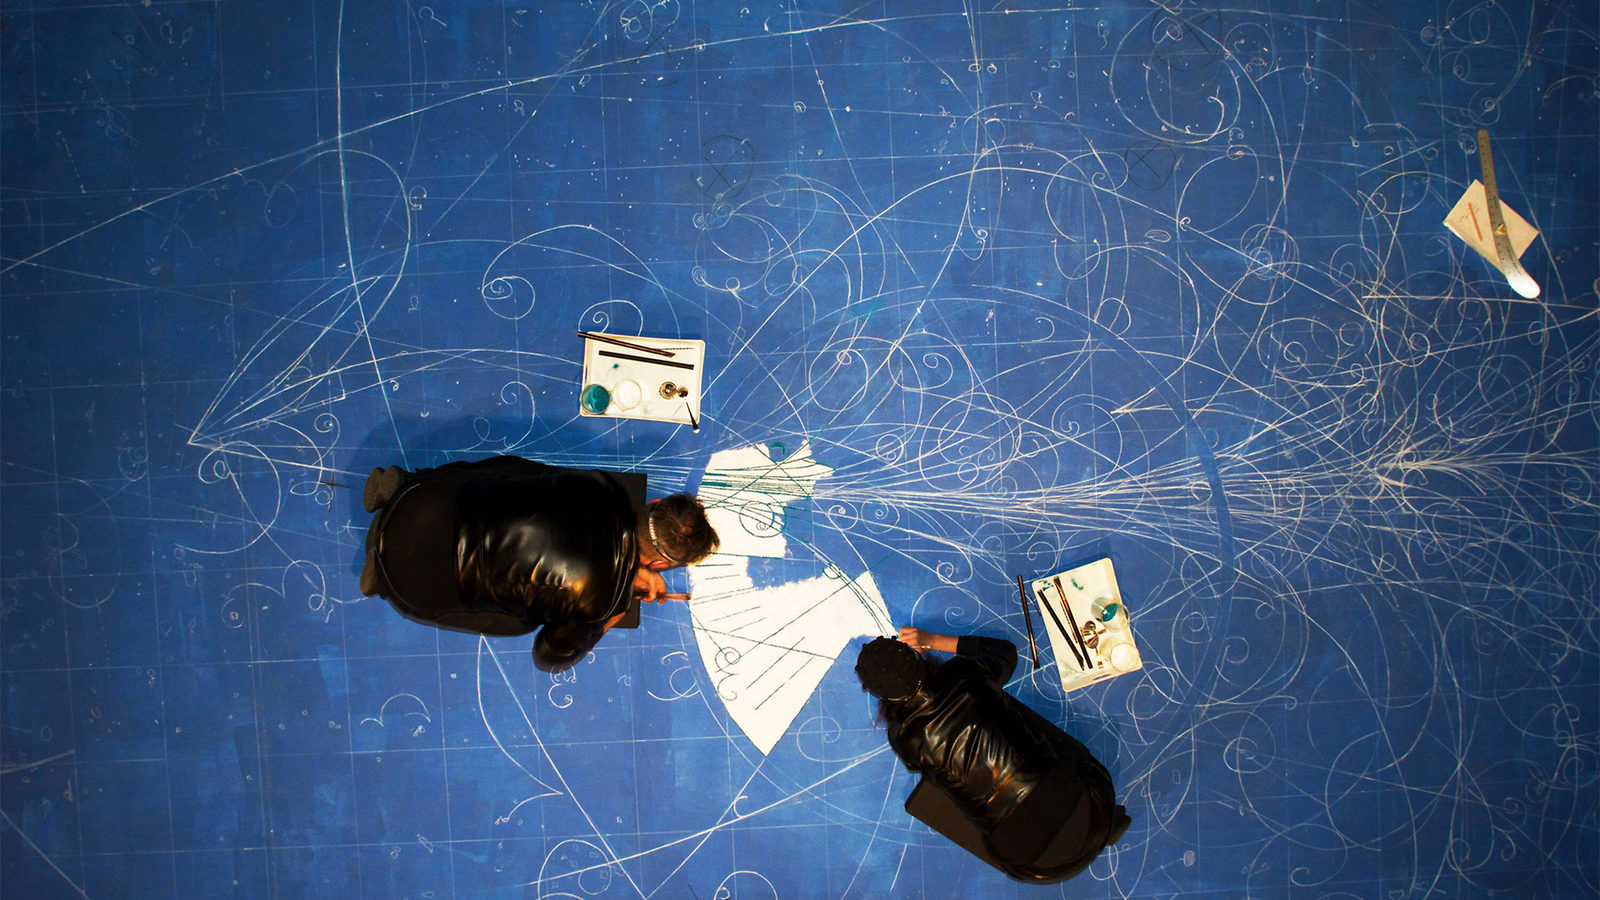 Overhead view of artists kneeling on a blue surface and creating an image of bubble chamber tracks with white sand